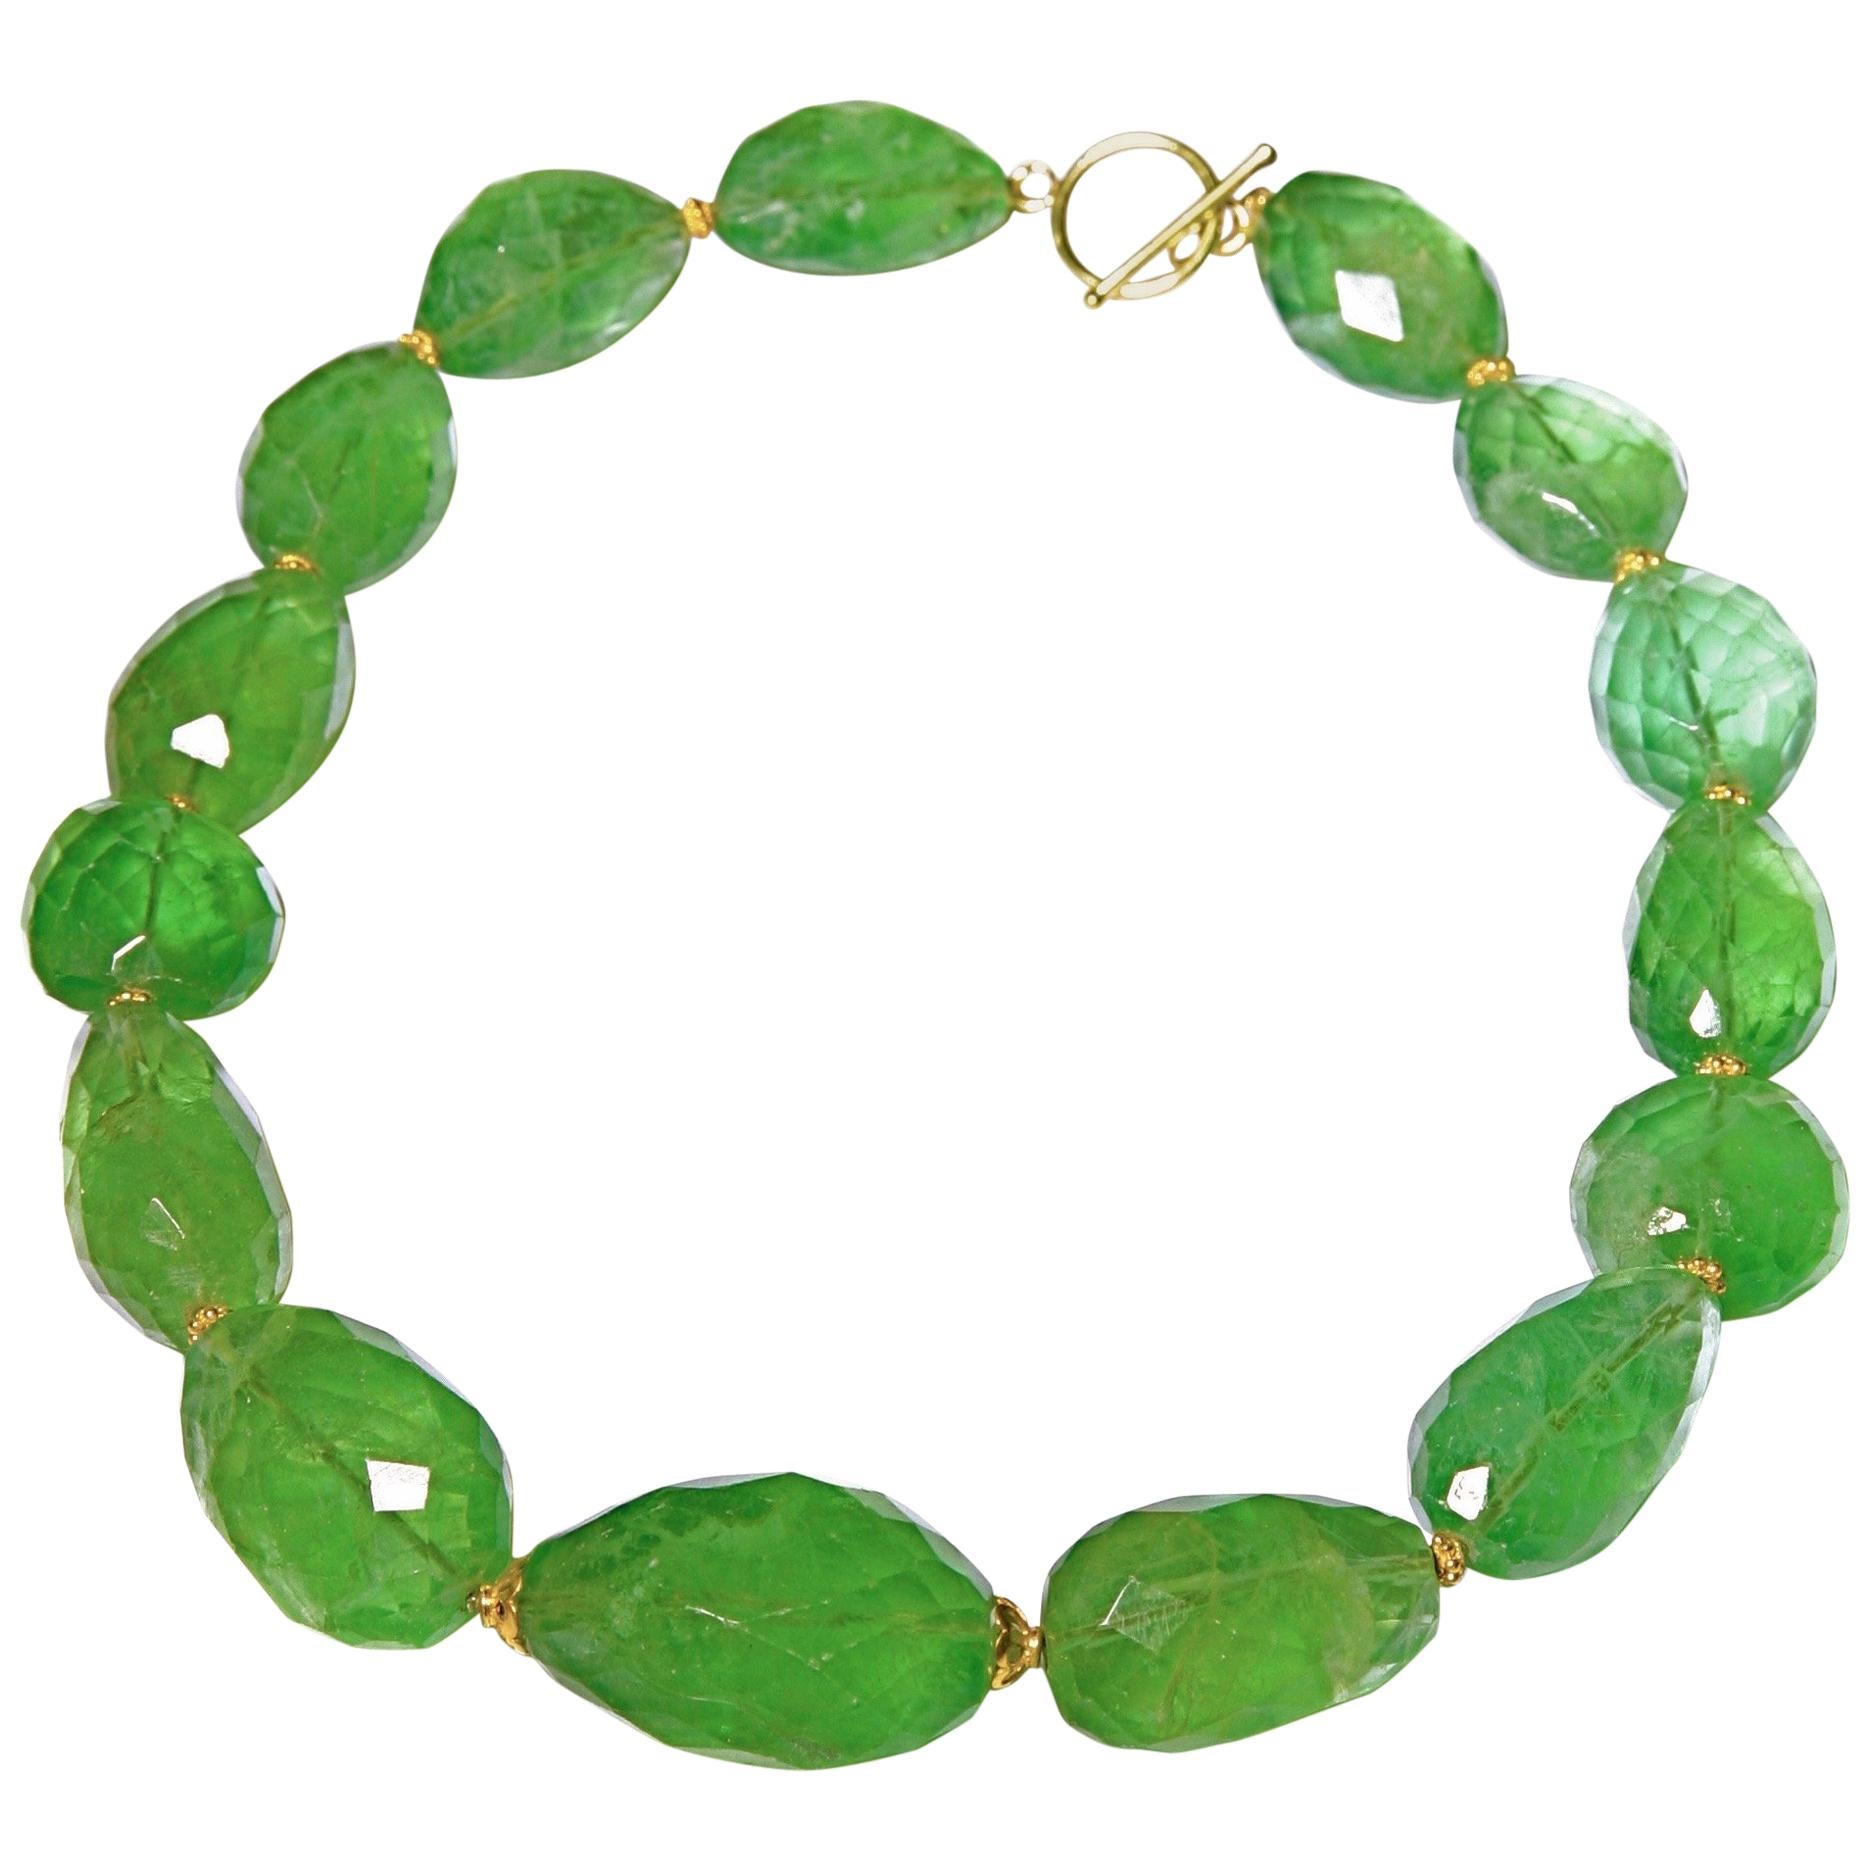 Green Flourite Faceted Necklace with 18 Karat Gold Clasp and Rondelles im Angebot